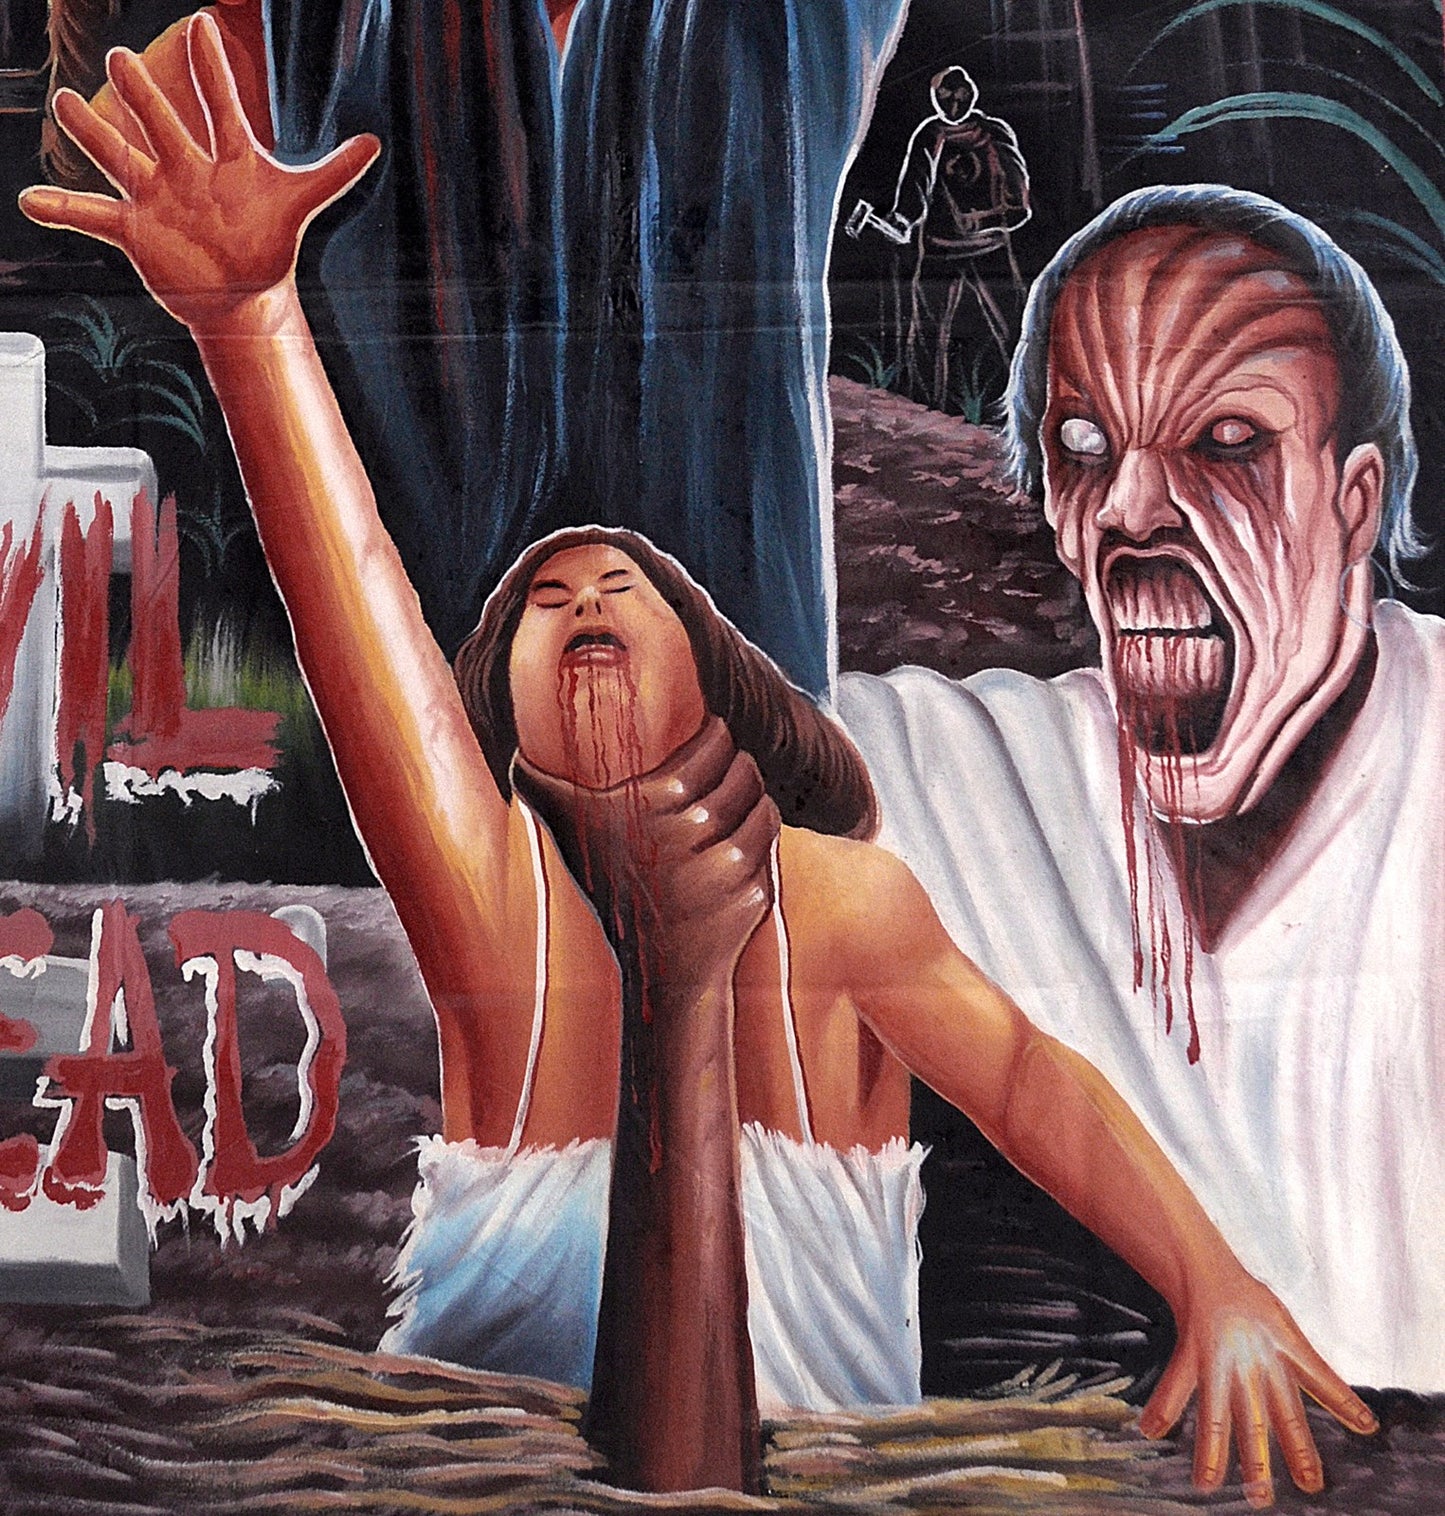 EVIL DEAD MOVIE POSTER HAND PAINTED IN GHANA FOR THE LOCAL CINEMA MORE DETAILS